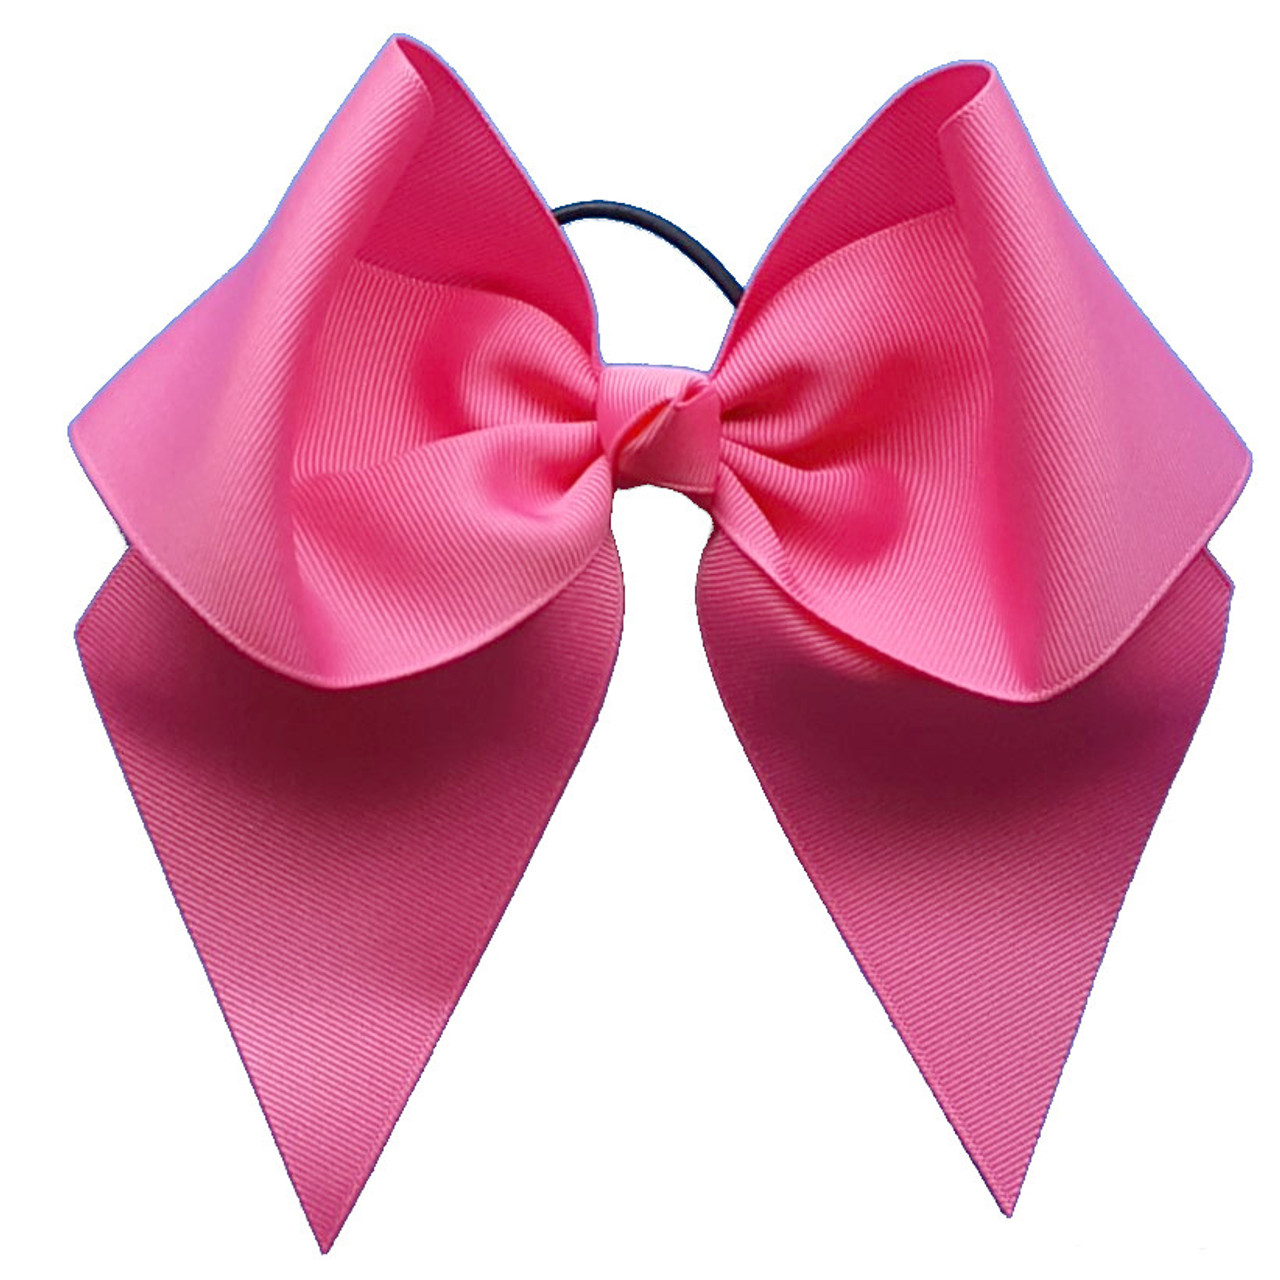 international bow day pink bows glitter ribbon png download - 4096